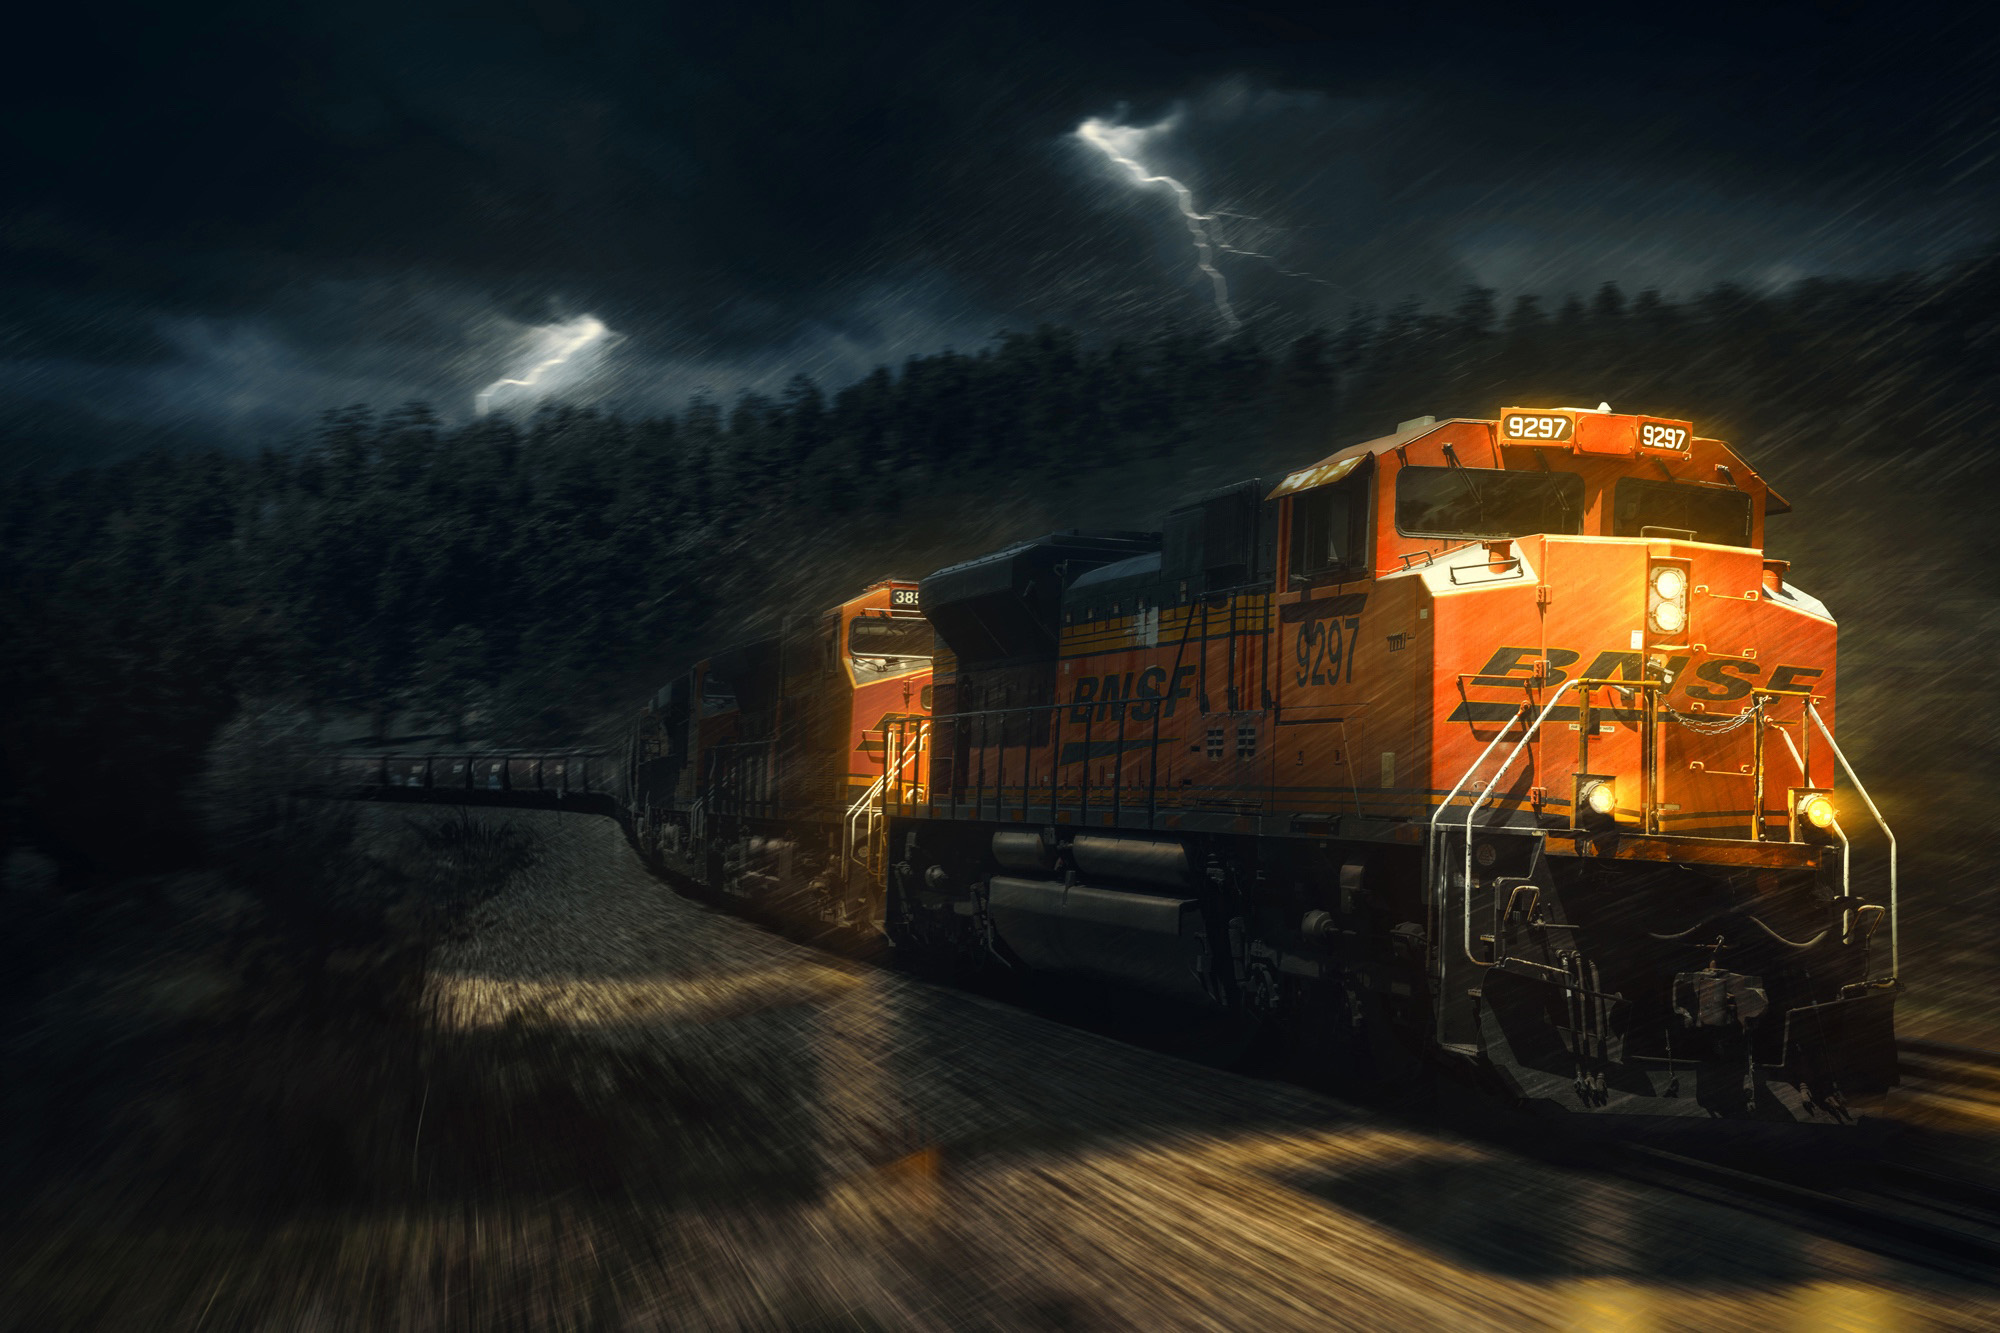 Freight train in an Arizona photographed by Automotive Photographer Blair Bunting